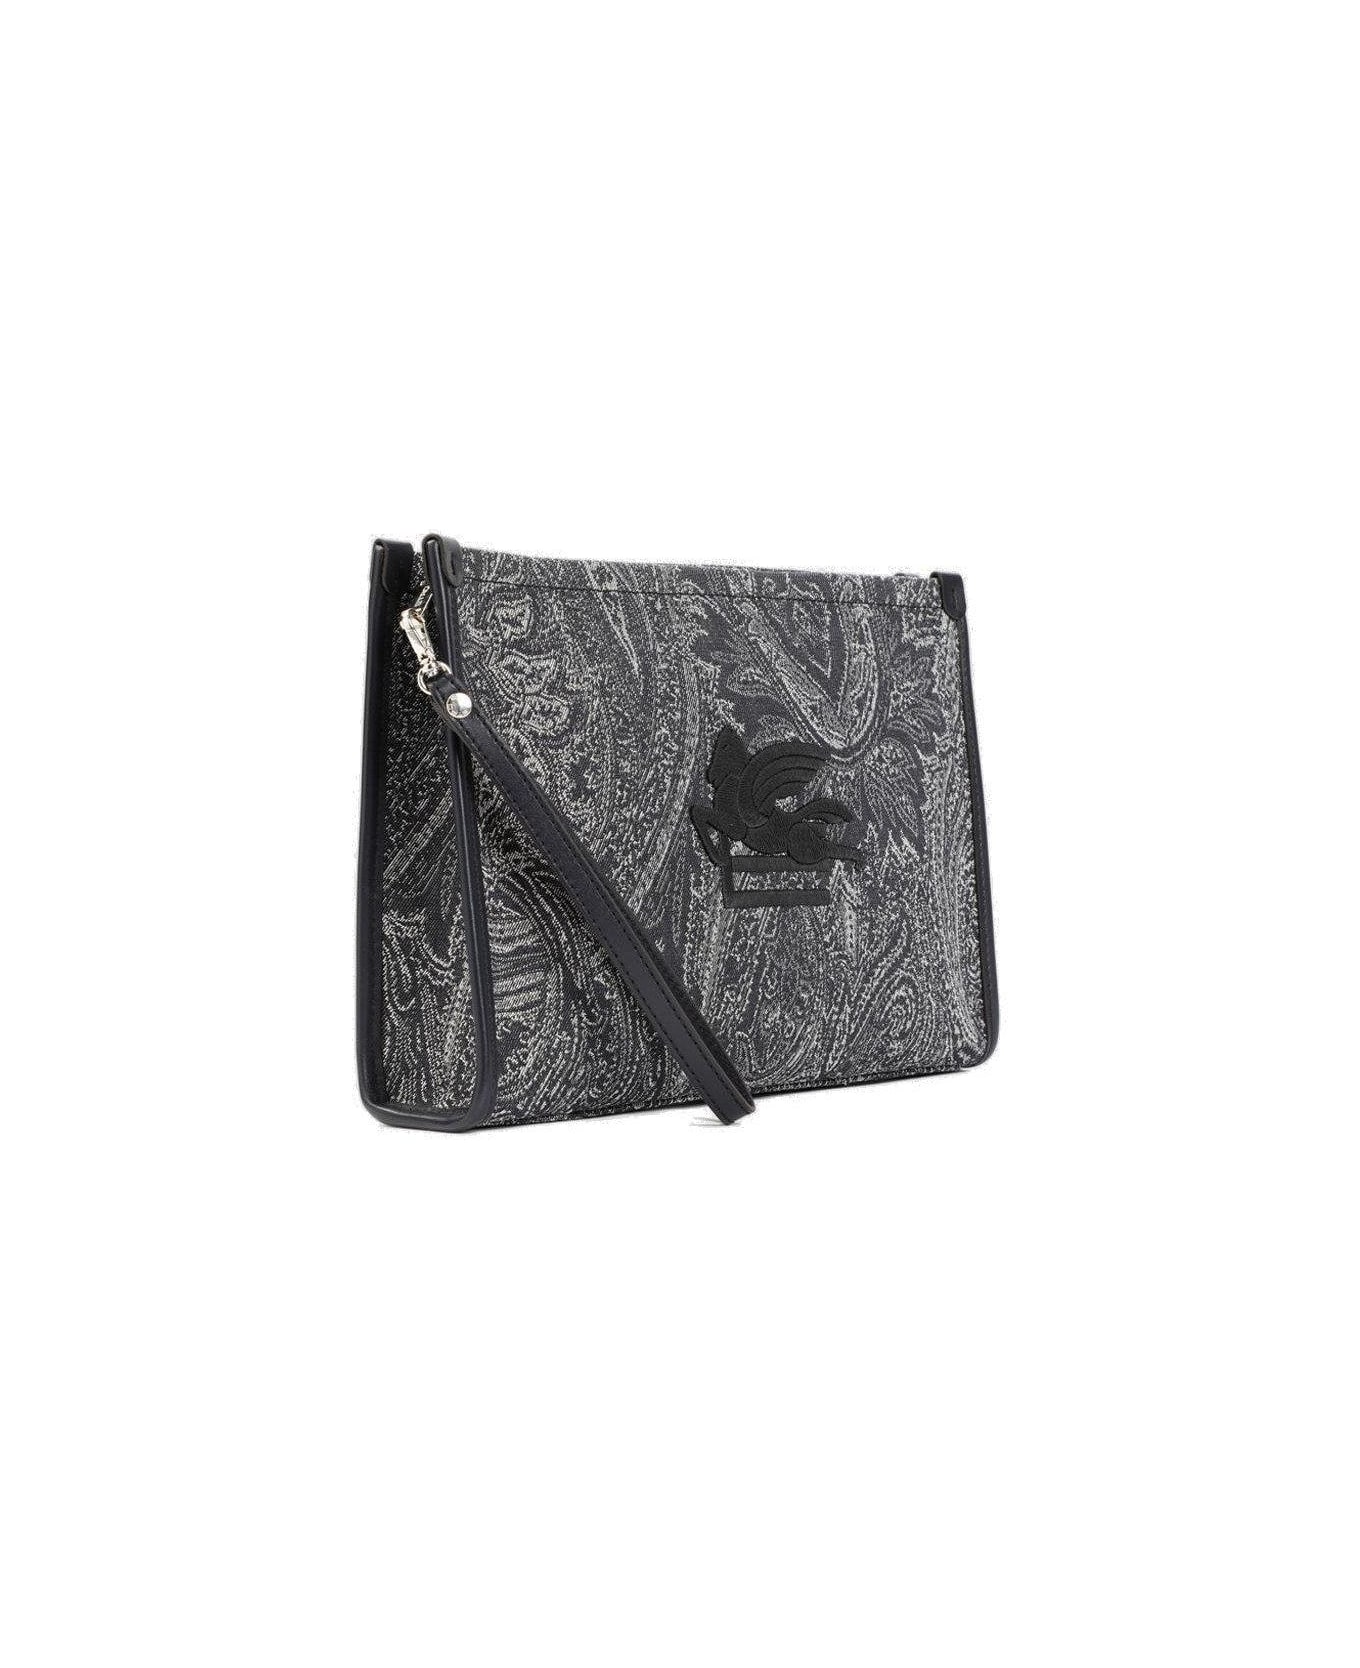 Etro Navy Blue Large Pouch With Paisley Jacquard Motif - Blue